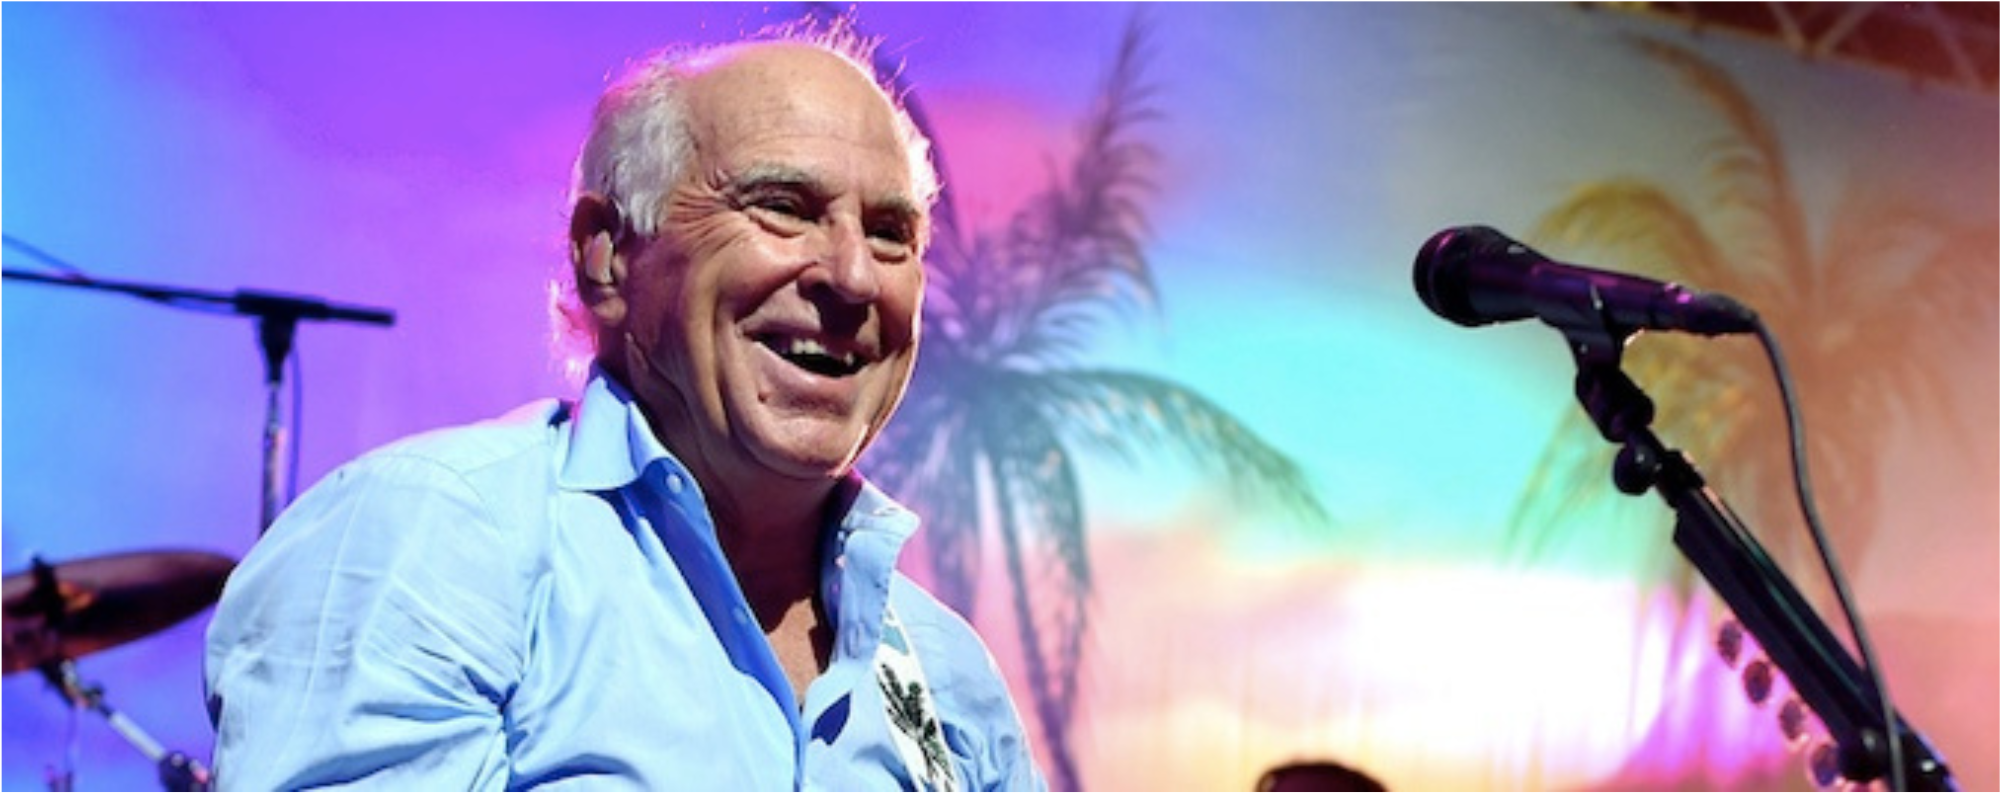 The Story Behind Jimmy Buffett’s Hopeful Song “Bubbles Up”